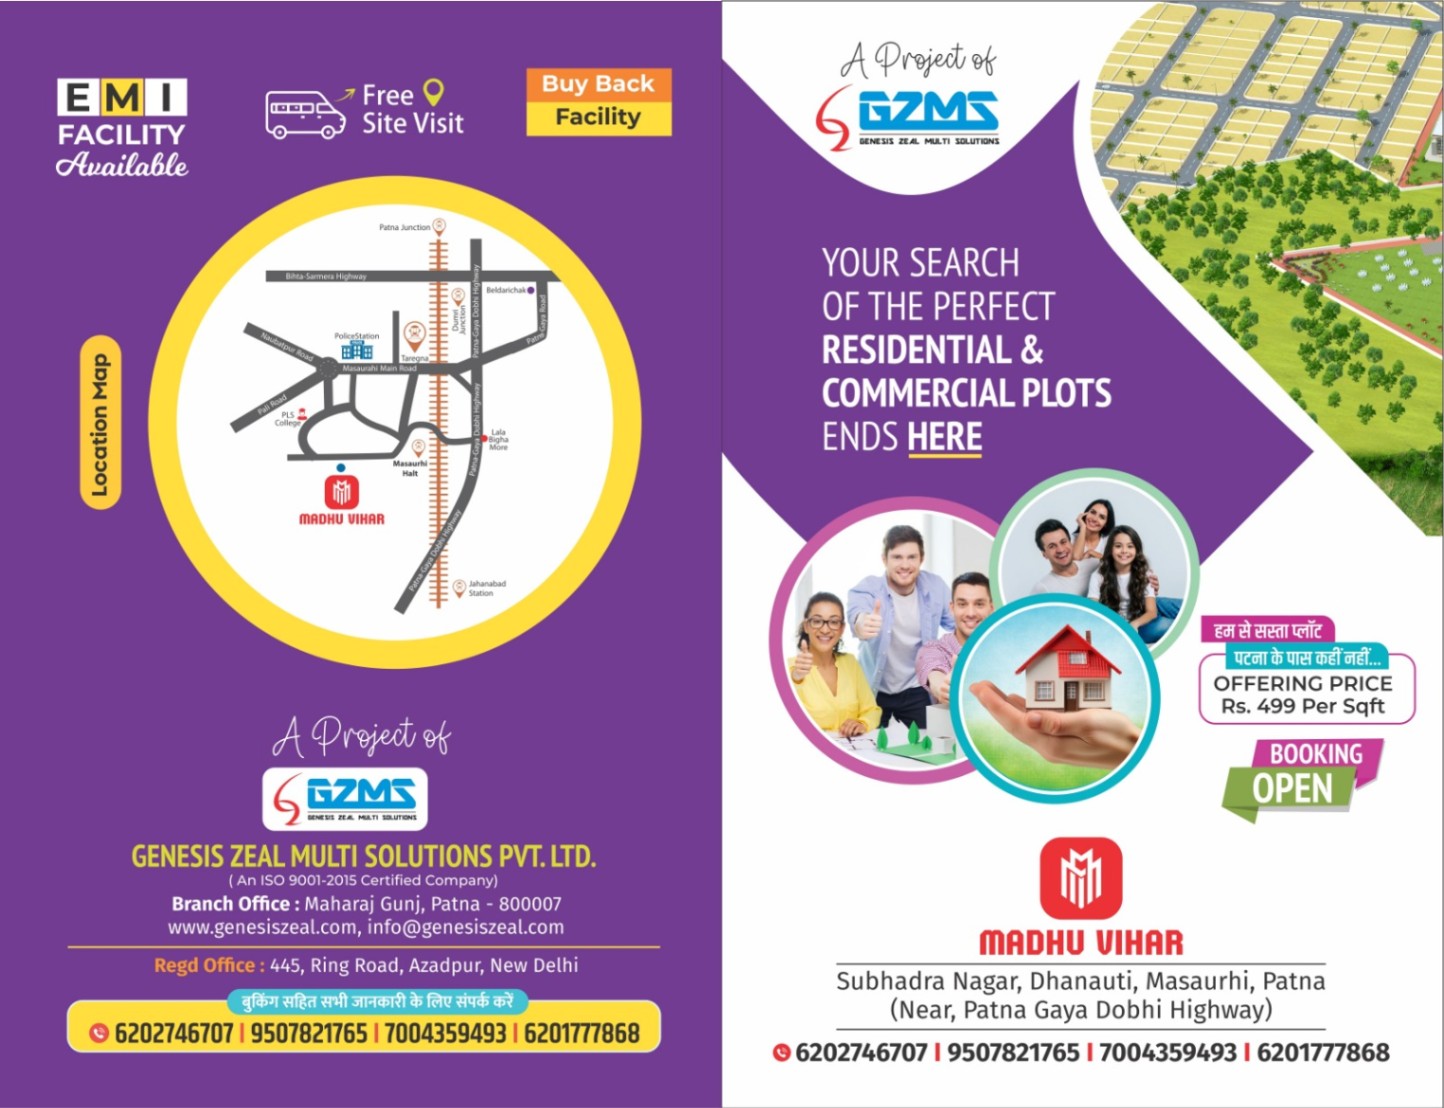 Residential plots available at very reasonable price at nearby Patna Dobhi highway, with parking,school, temple, road, drainage ,electricity at 499/- rupees per sqft.